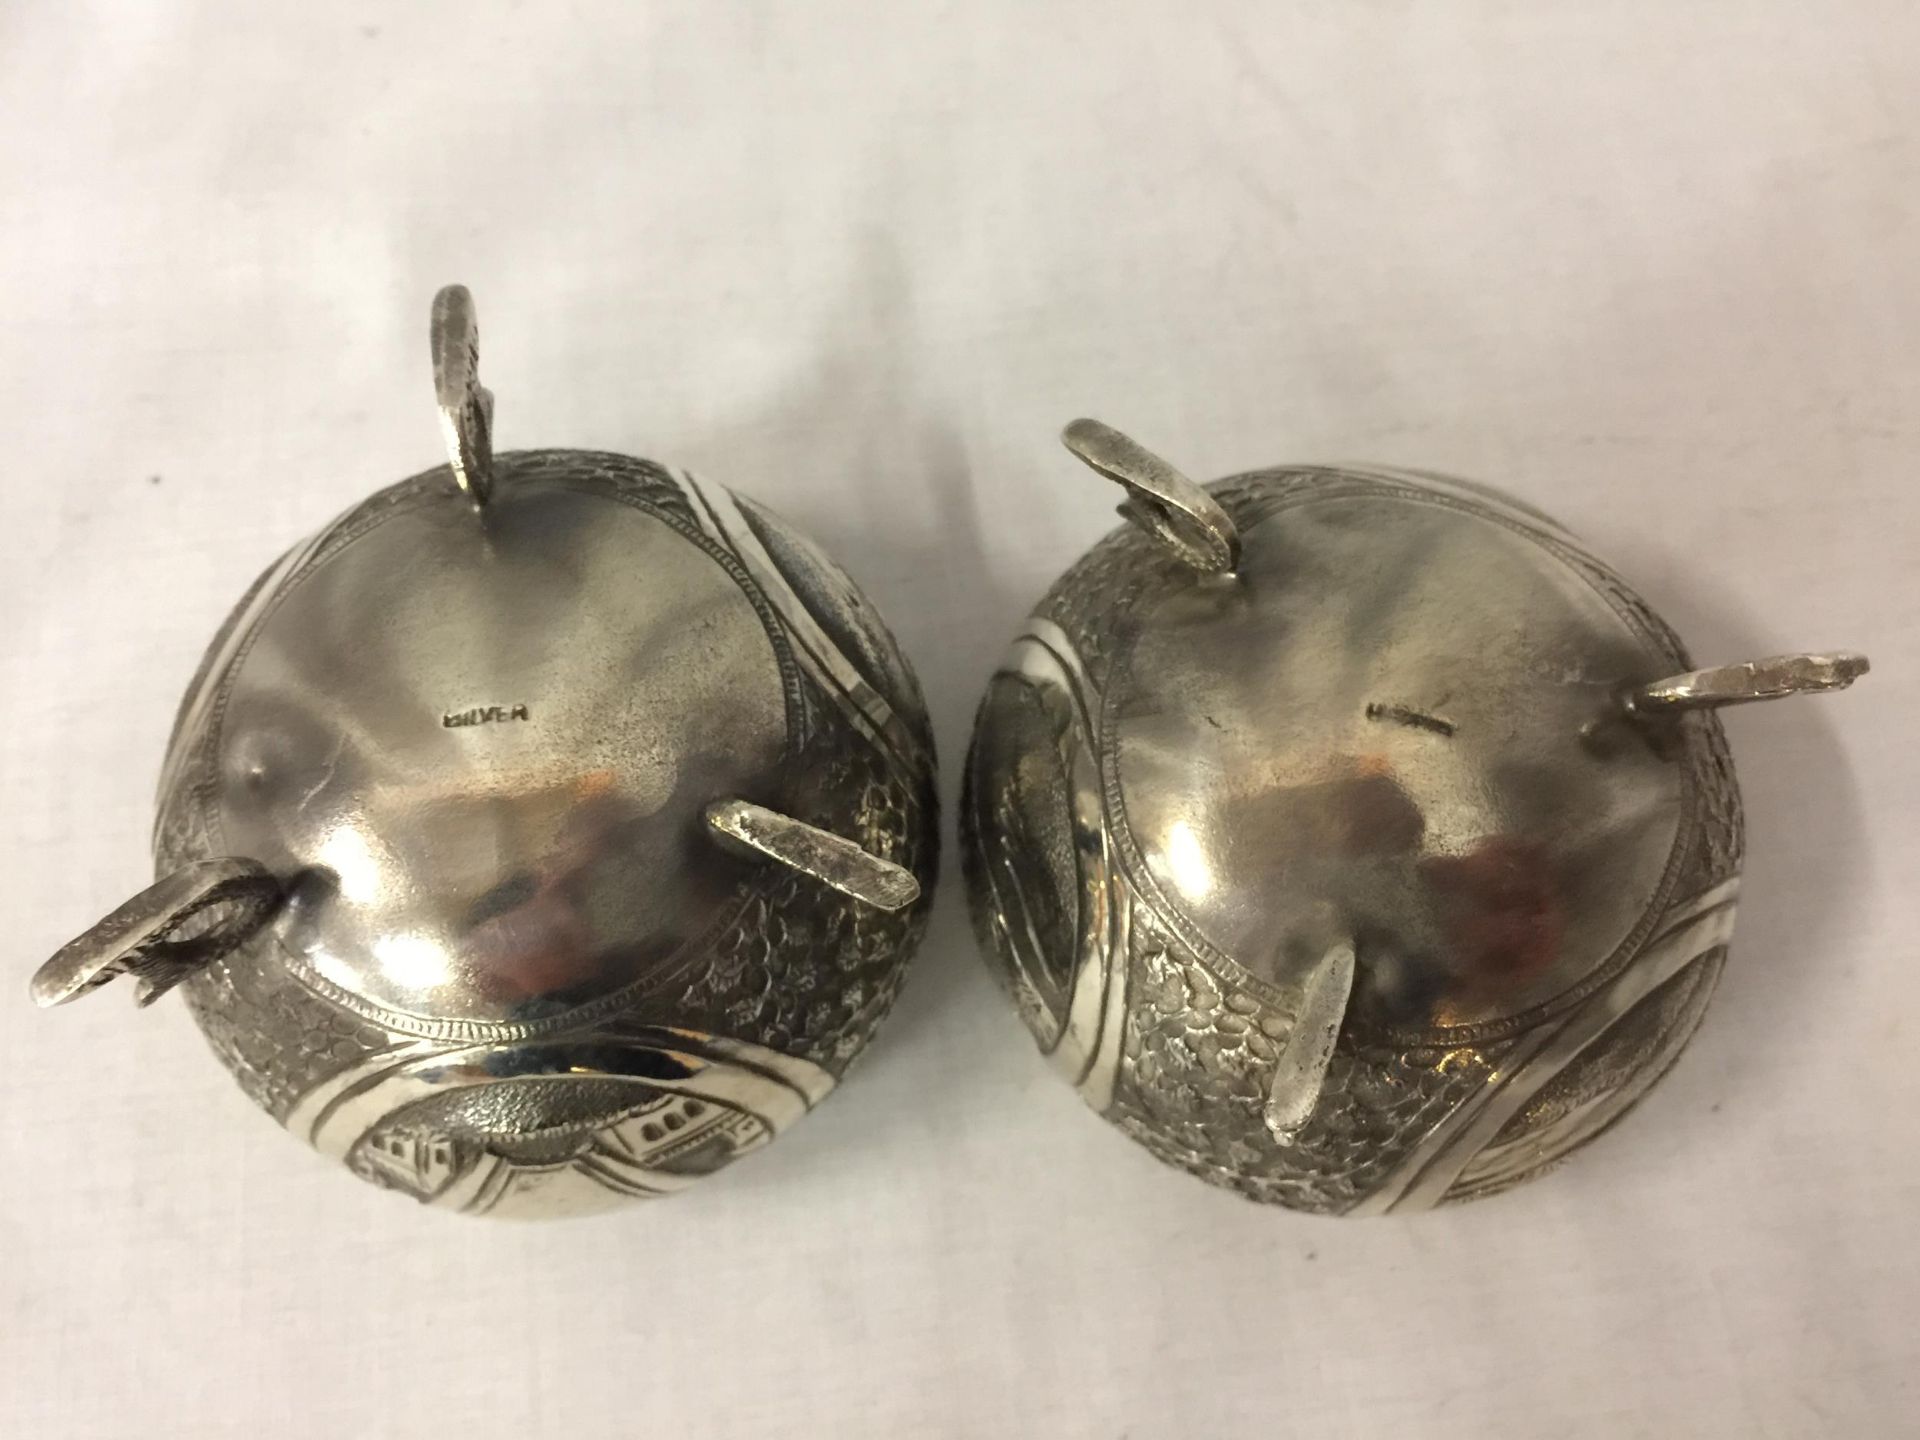 TWO DECORATIVE THREE FOOTED MARKED SILVER BOWLS WITH CHURCH DESIGN GROSS WEIGHT 135 GRAMS - Image 4 of 4